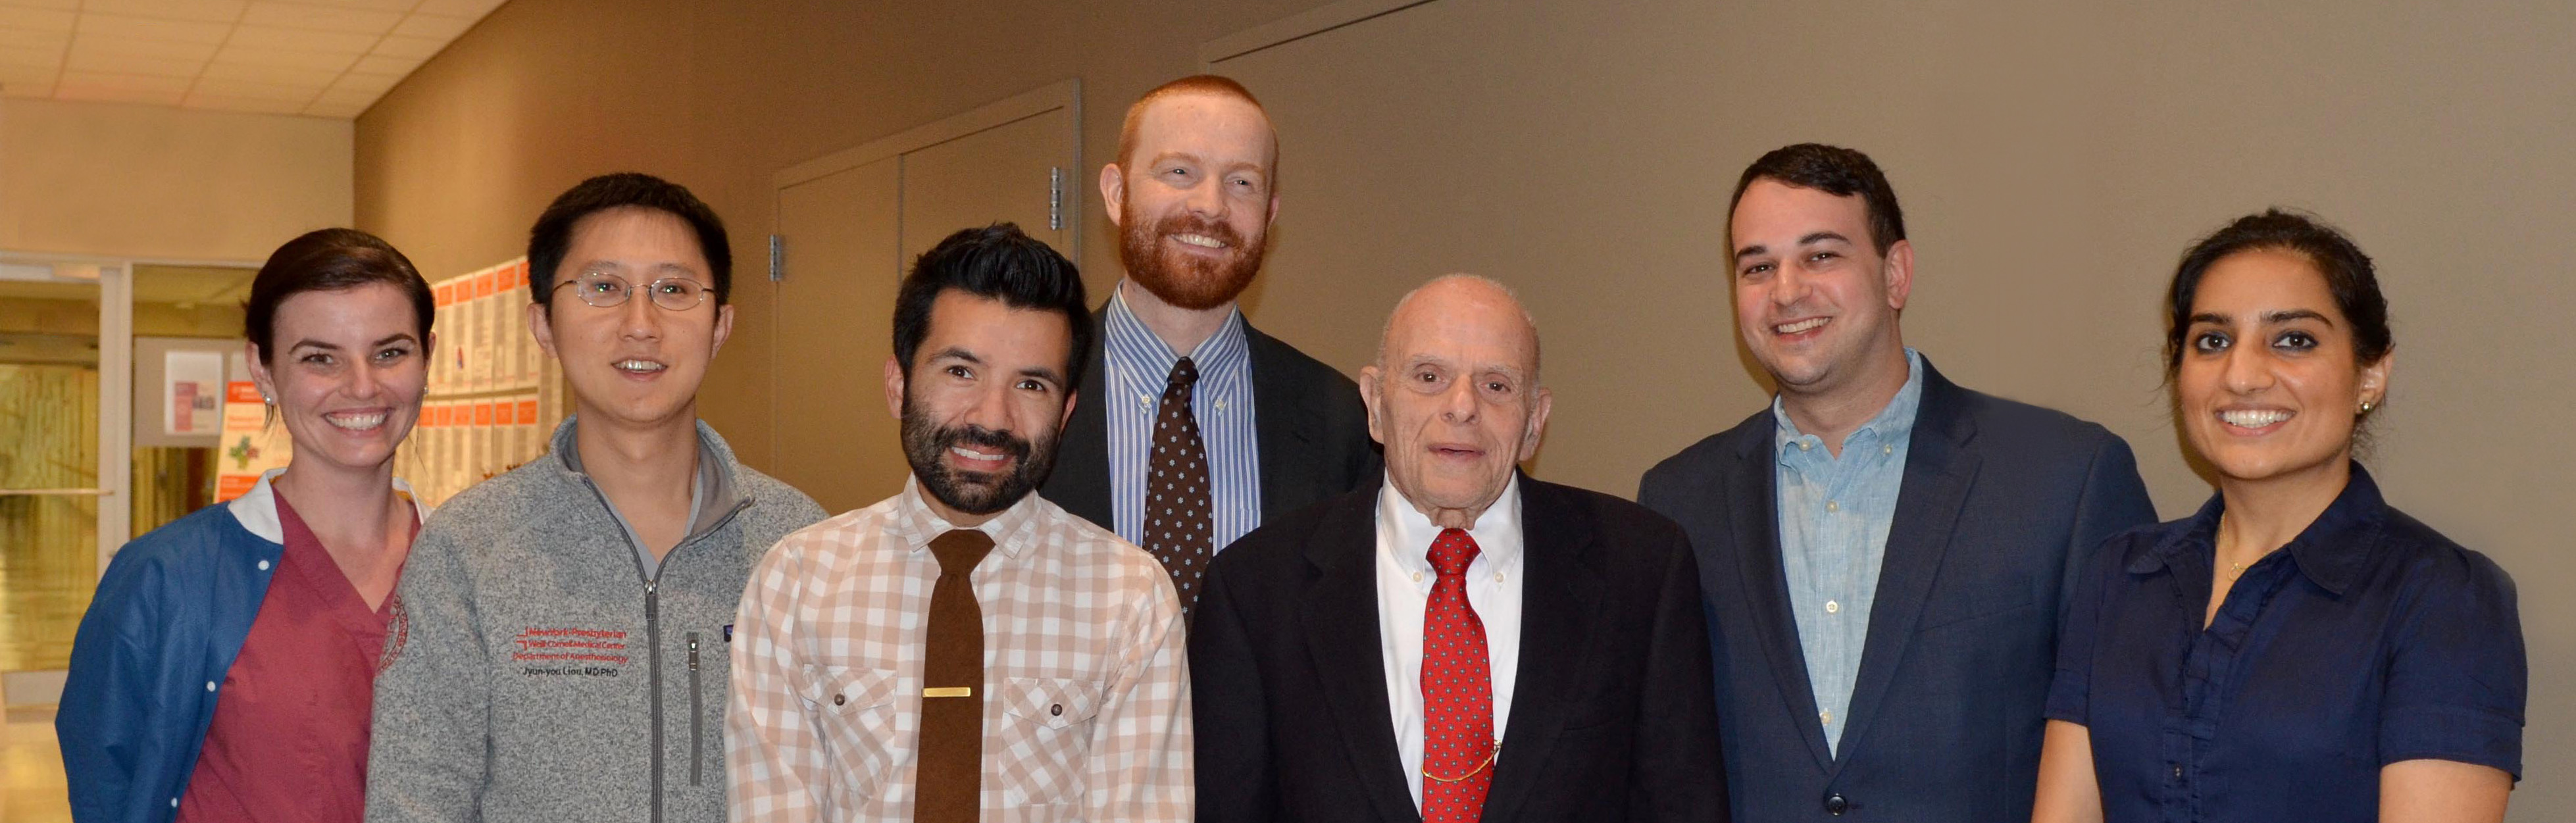 Professor Emeritus of Anesthesiology Dr. Alan Van Poznak with current and former Van Poznak Anesthesiology Research Scholars.